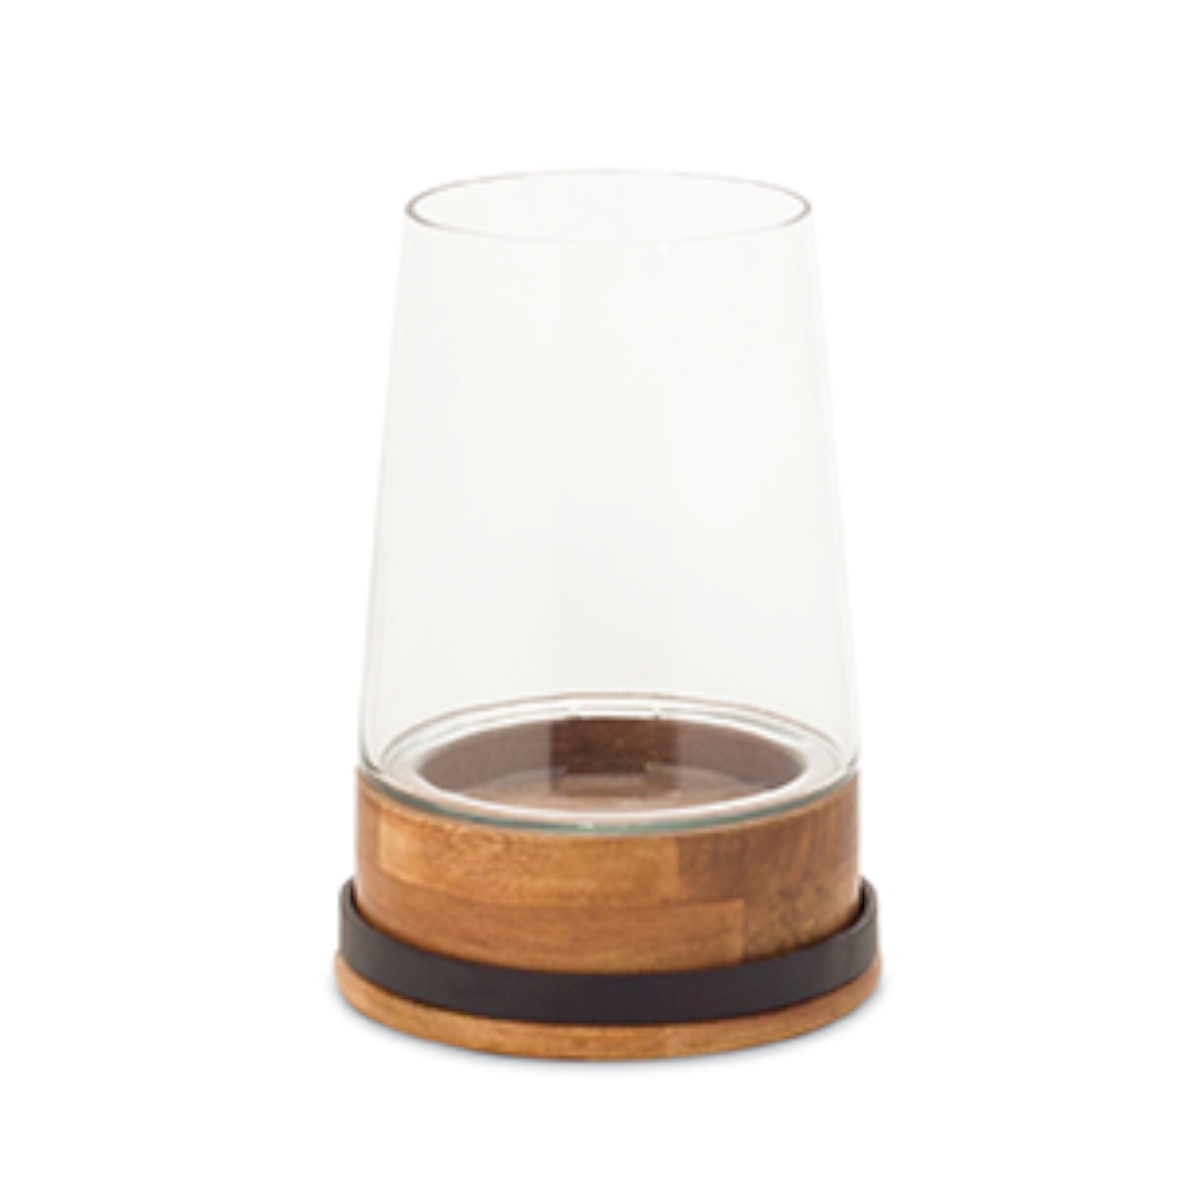 72094ds 8 X 5.5 In. Glass & Wood Candle Holder, Brown & Black